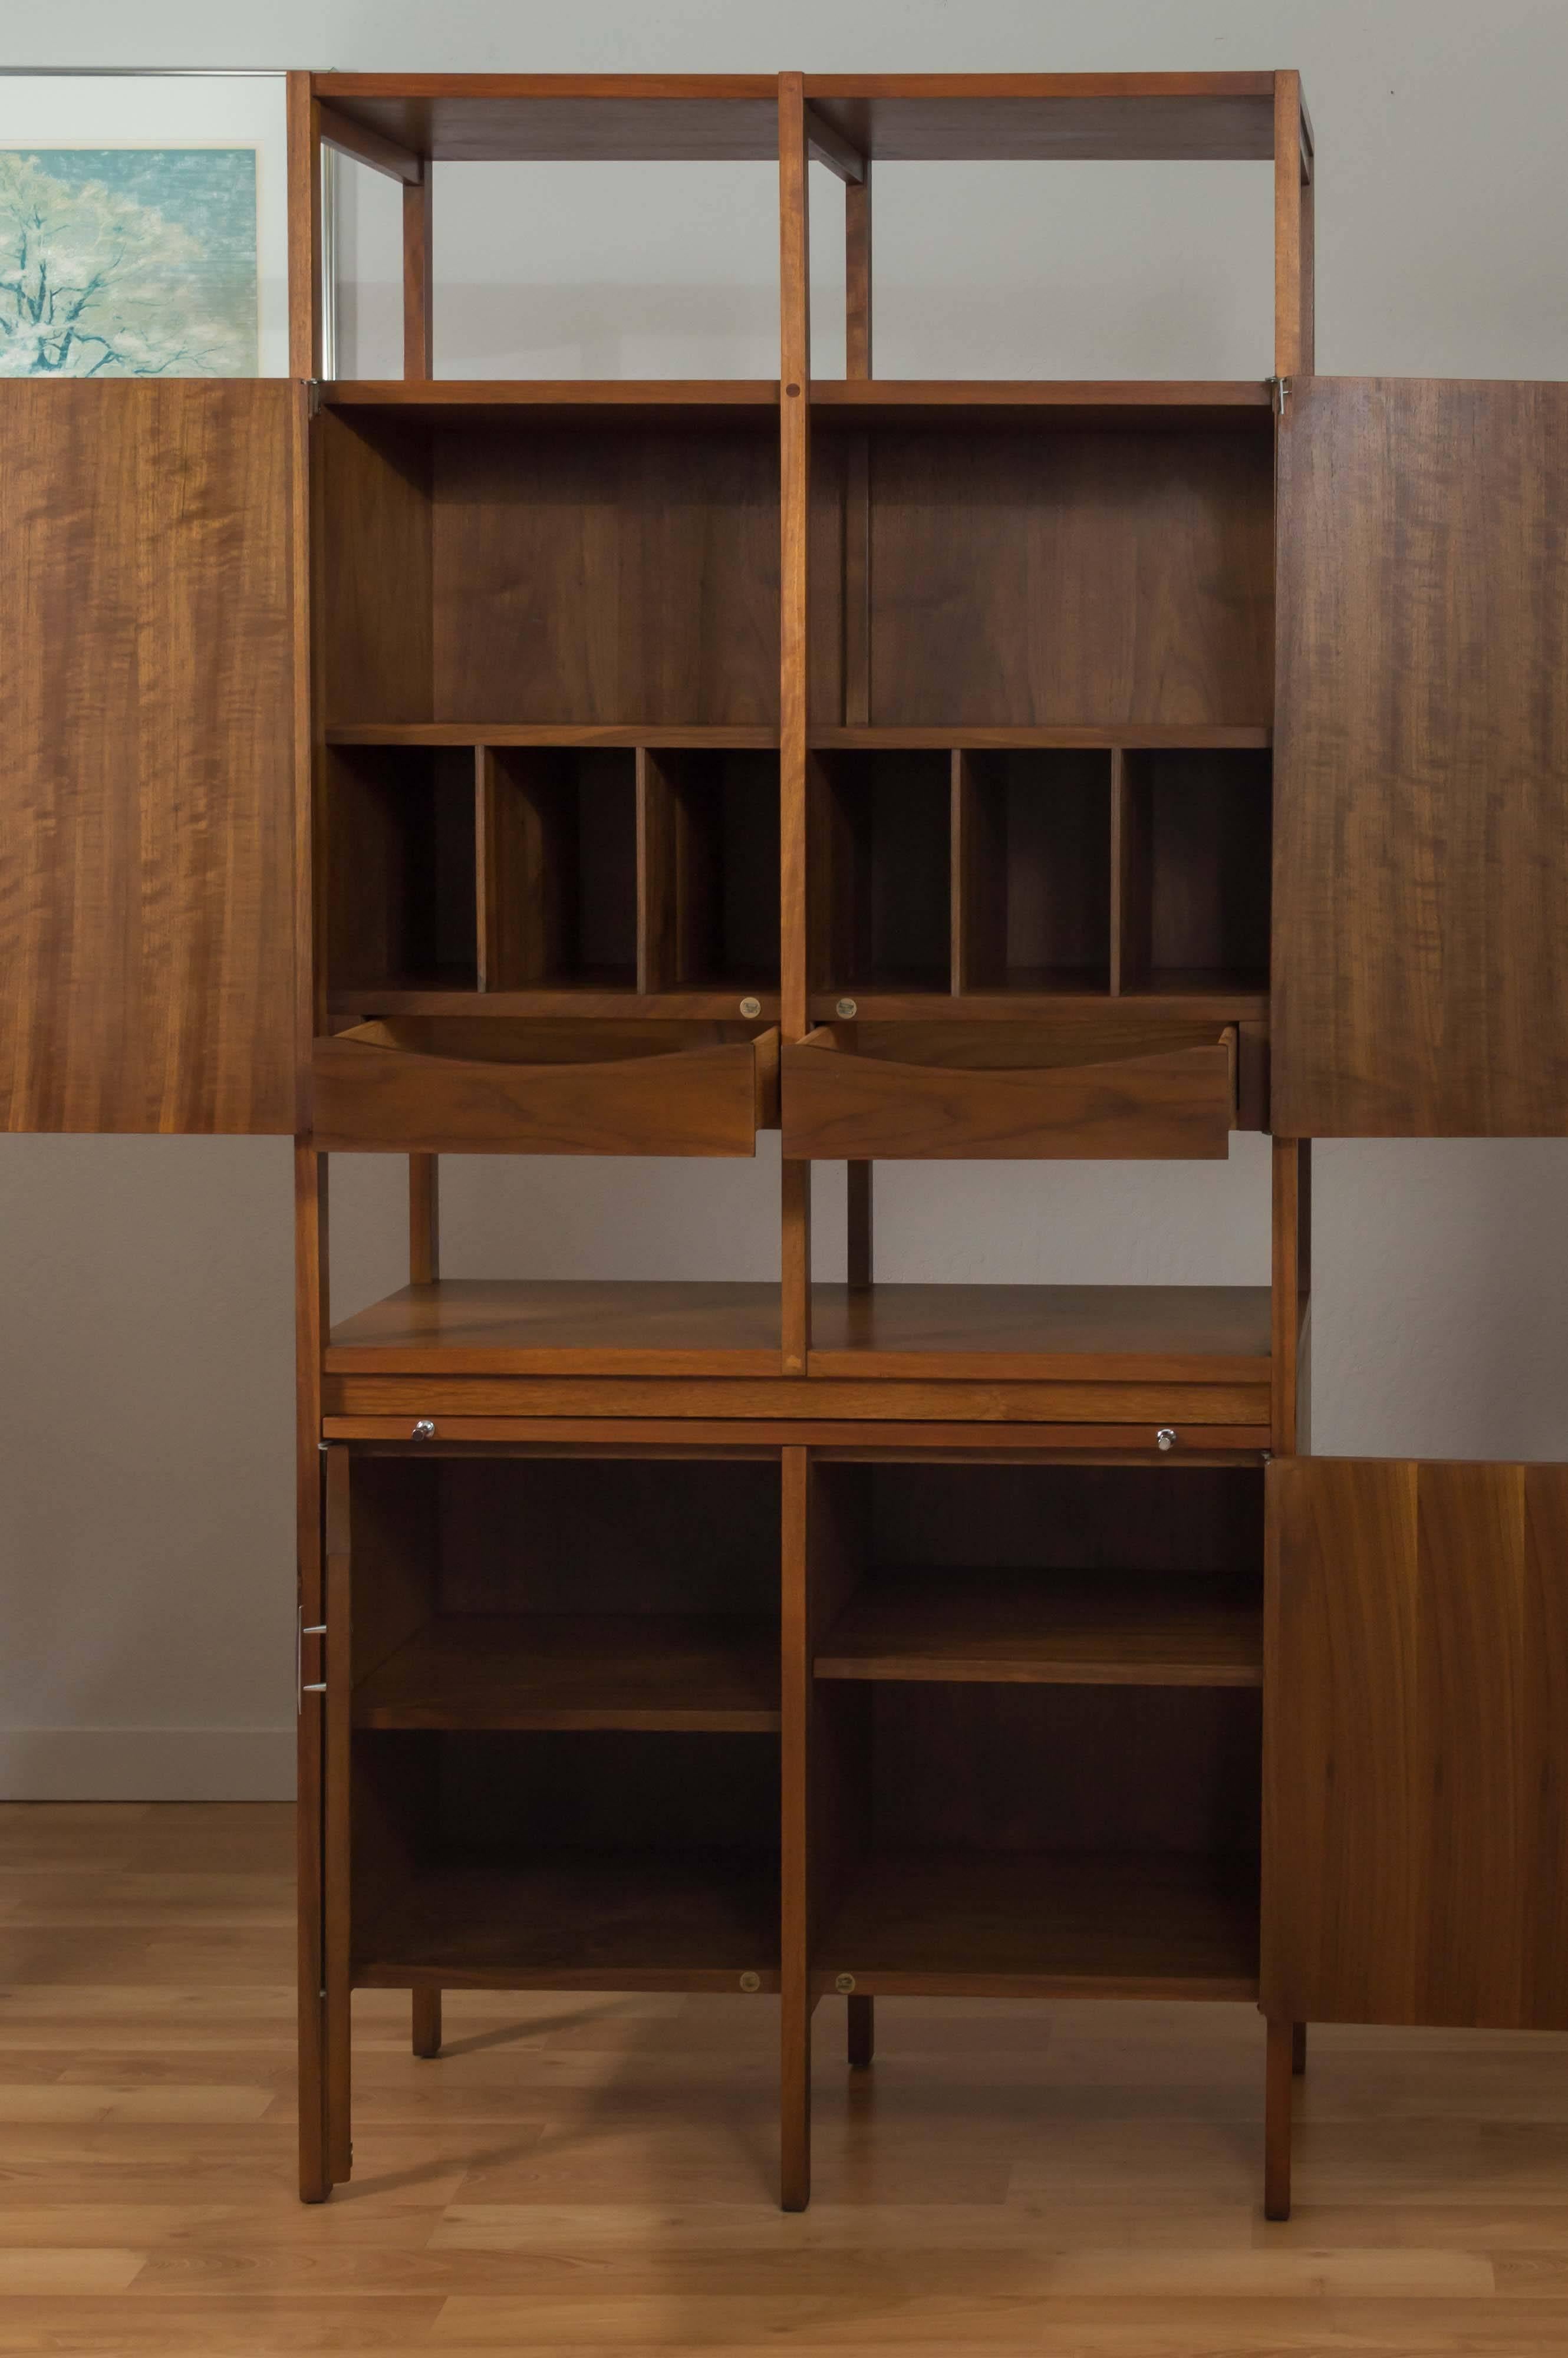 Mid-20th Century “Delineator” Walnut Dry Bar or Tall Cabinet by Paul McCobb for Lane